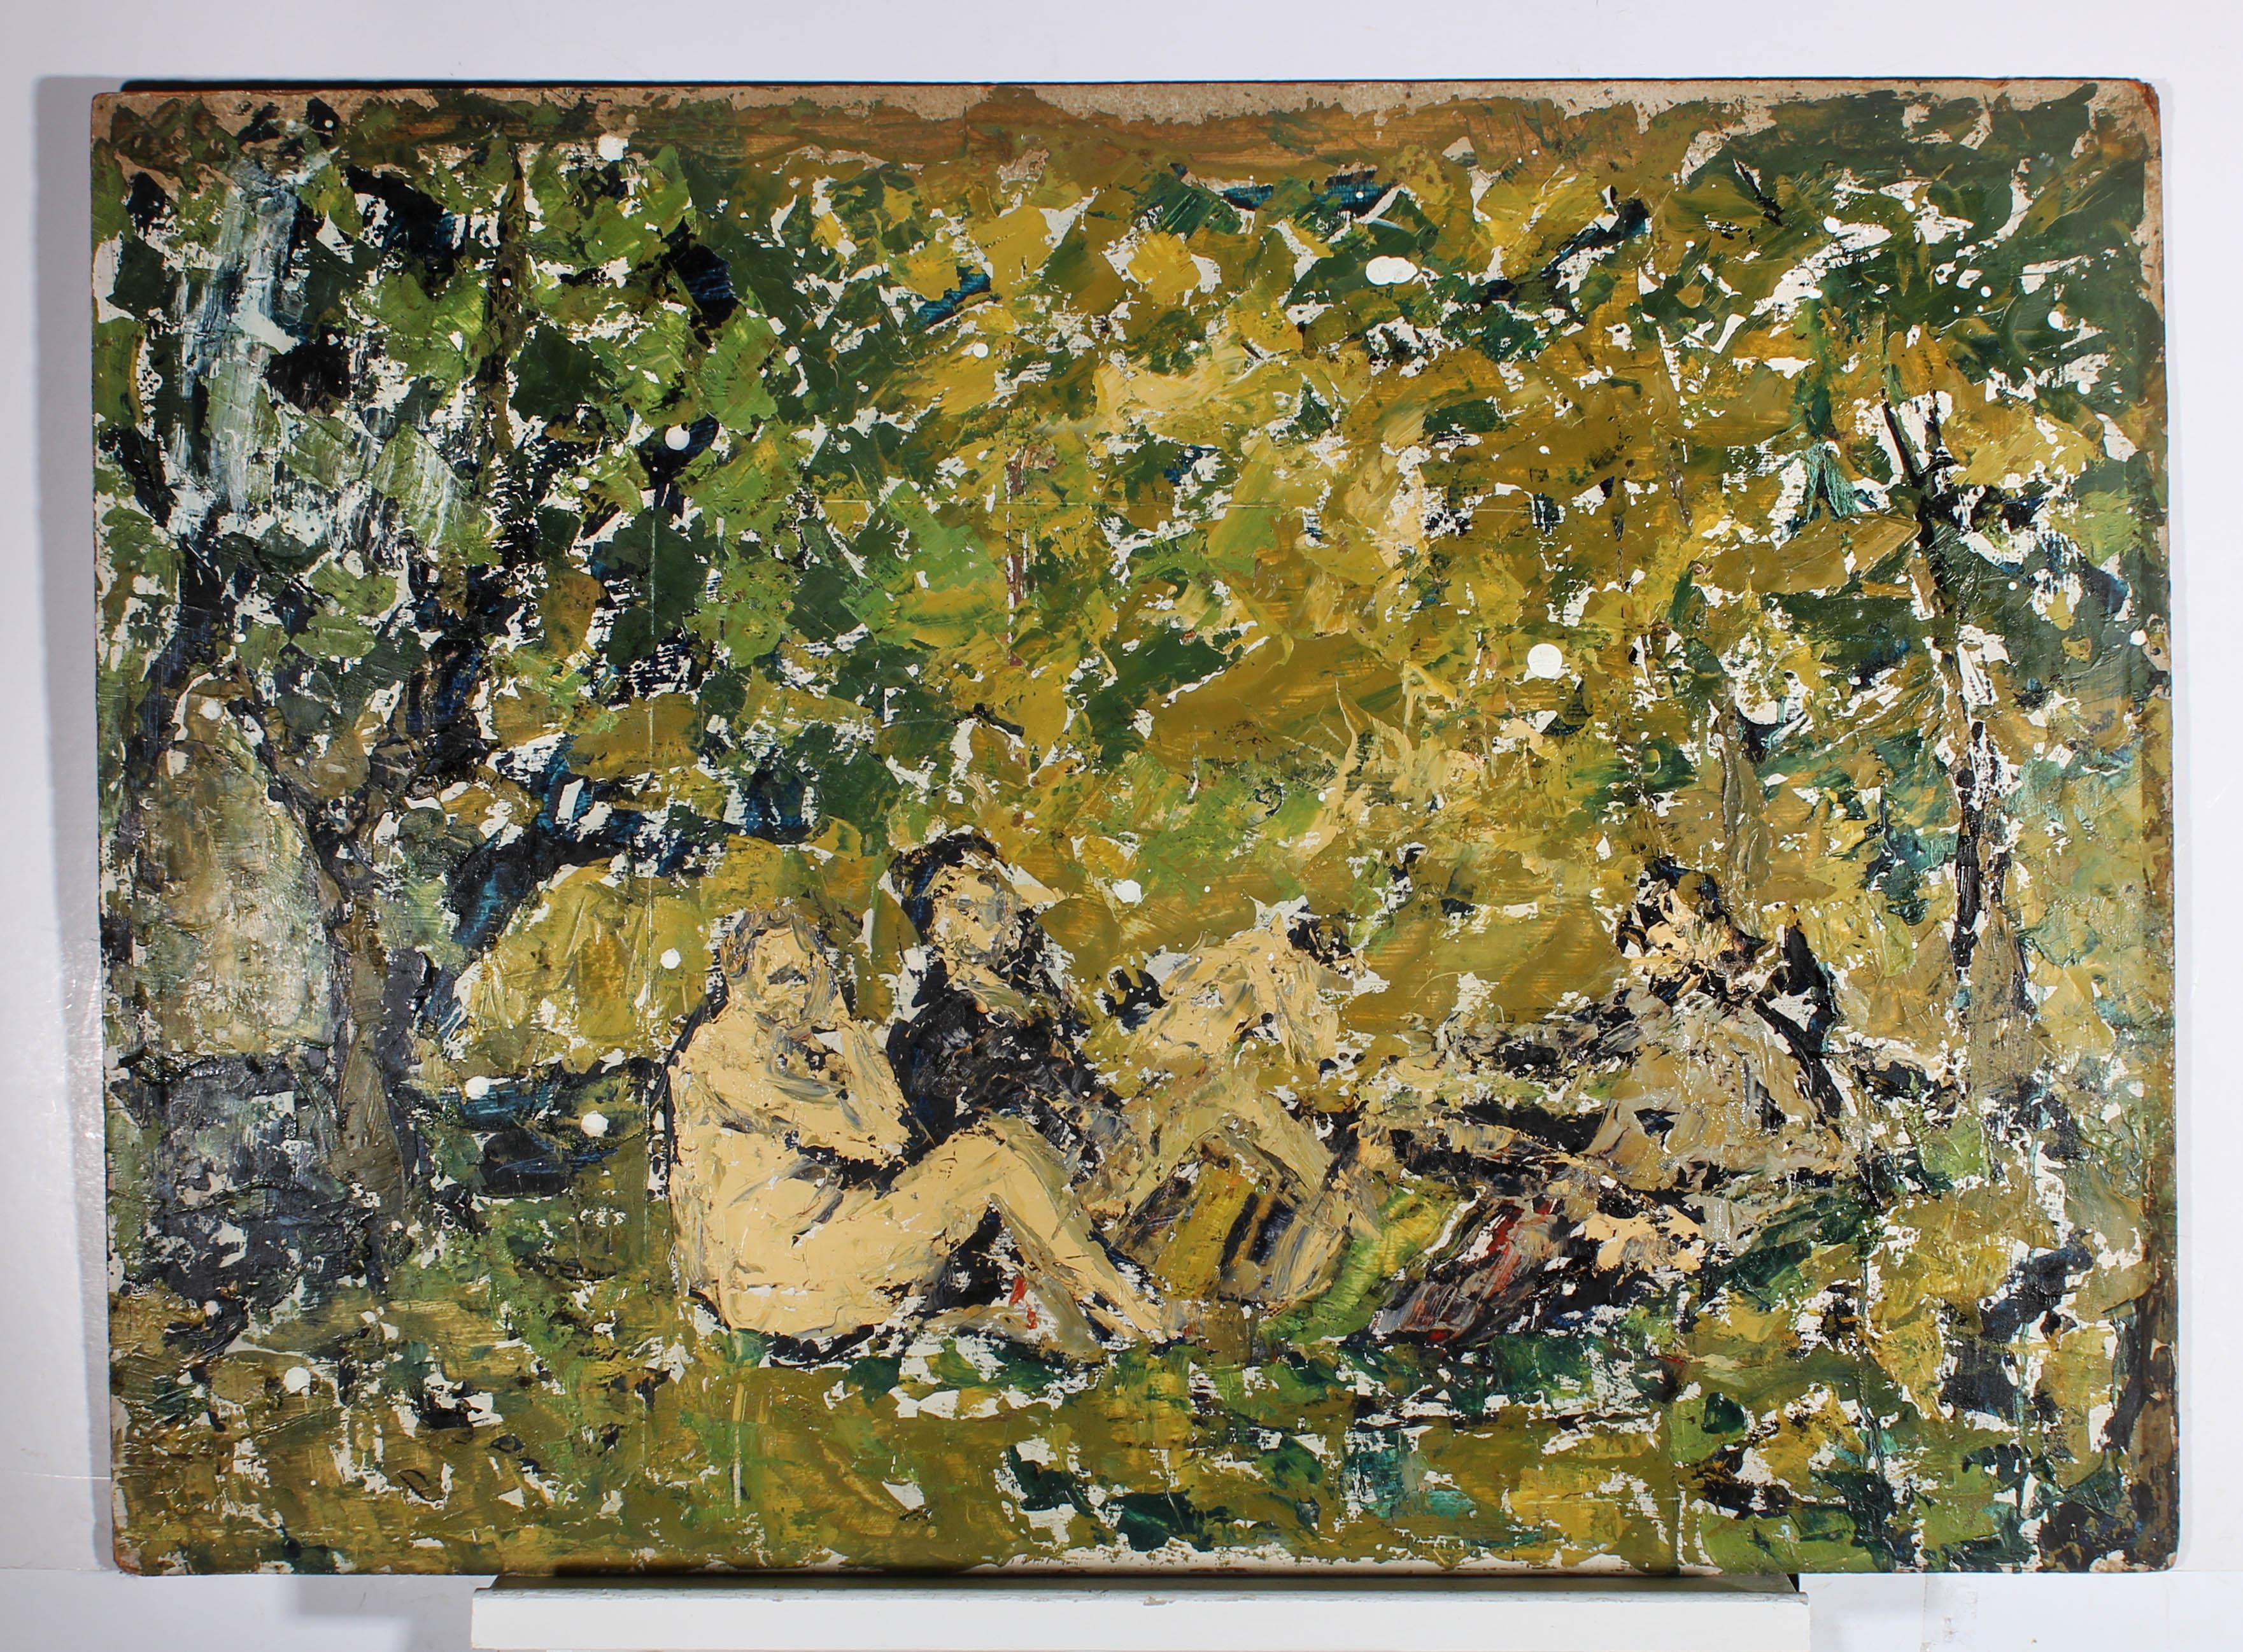 A heavily abstracted copy of the original painting by Manet. The scene shows a group of figures seated on the grass in a woodland clearing. One nude woman sits with two men and a second woman (heavily abstracted in this version) can be seen emerging